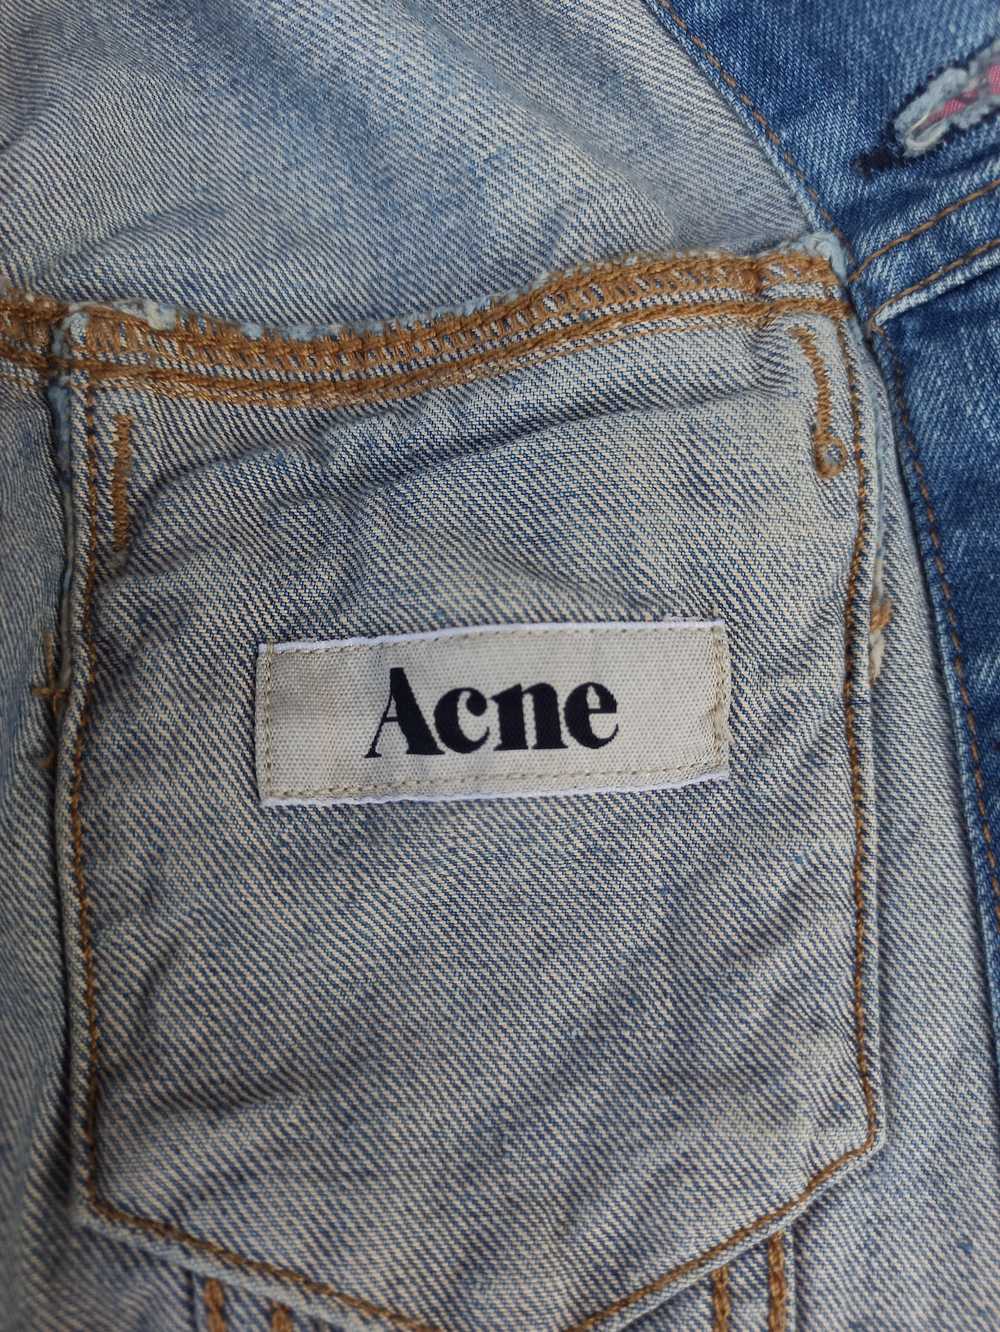 Acne Studios × Archival Clothing × Distressed Den… - image 7